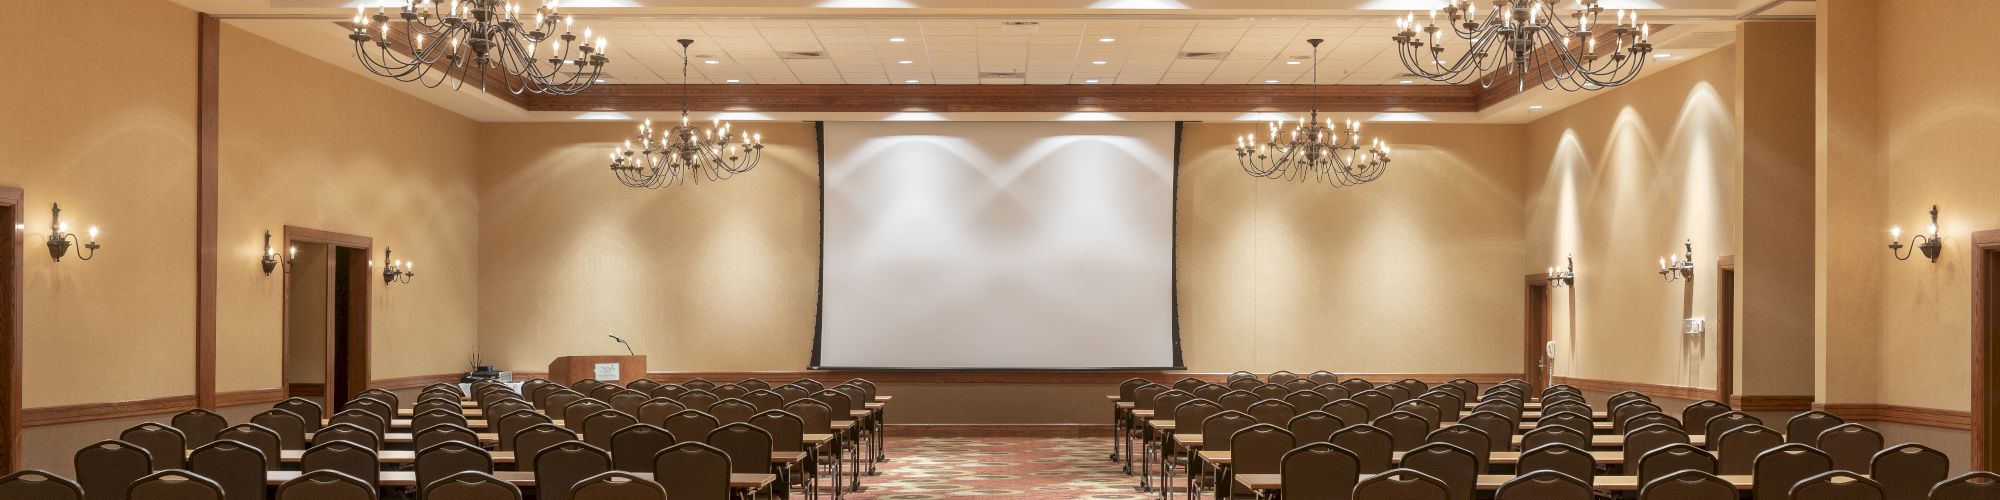 An empty conference room with rows of chairs, facing a large projection screen at the front, and ornate chandeliers hanging from the ceiling.